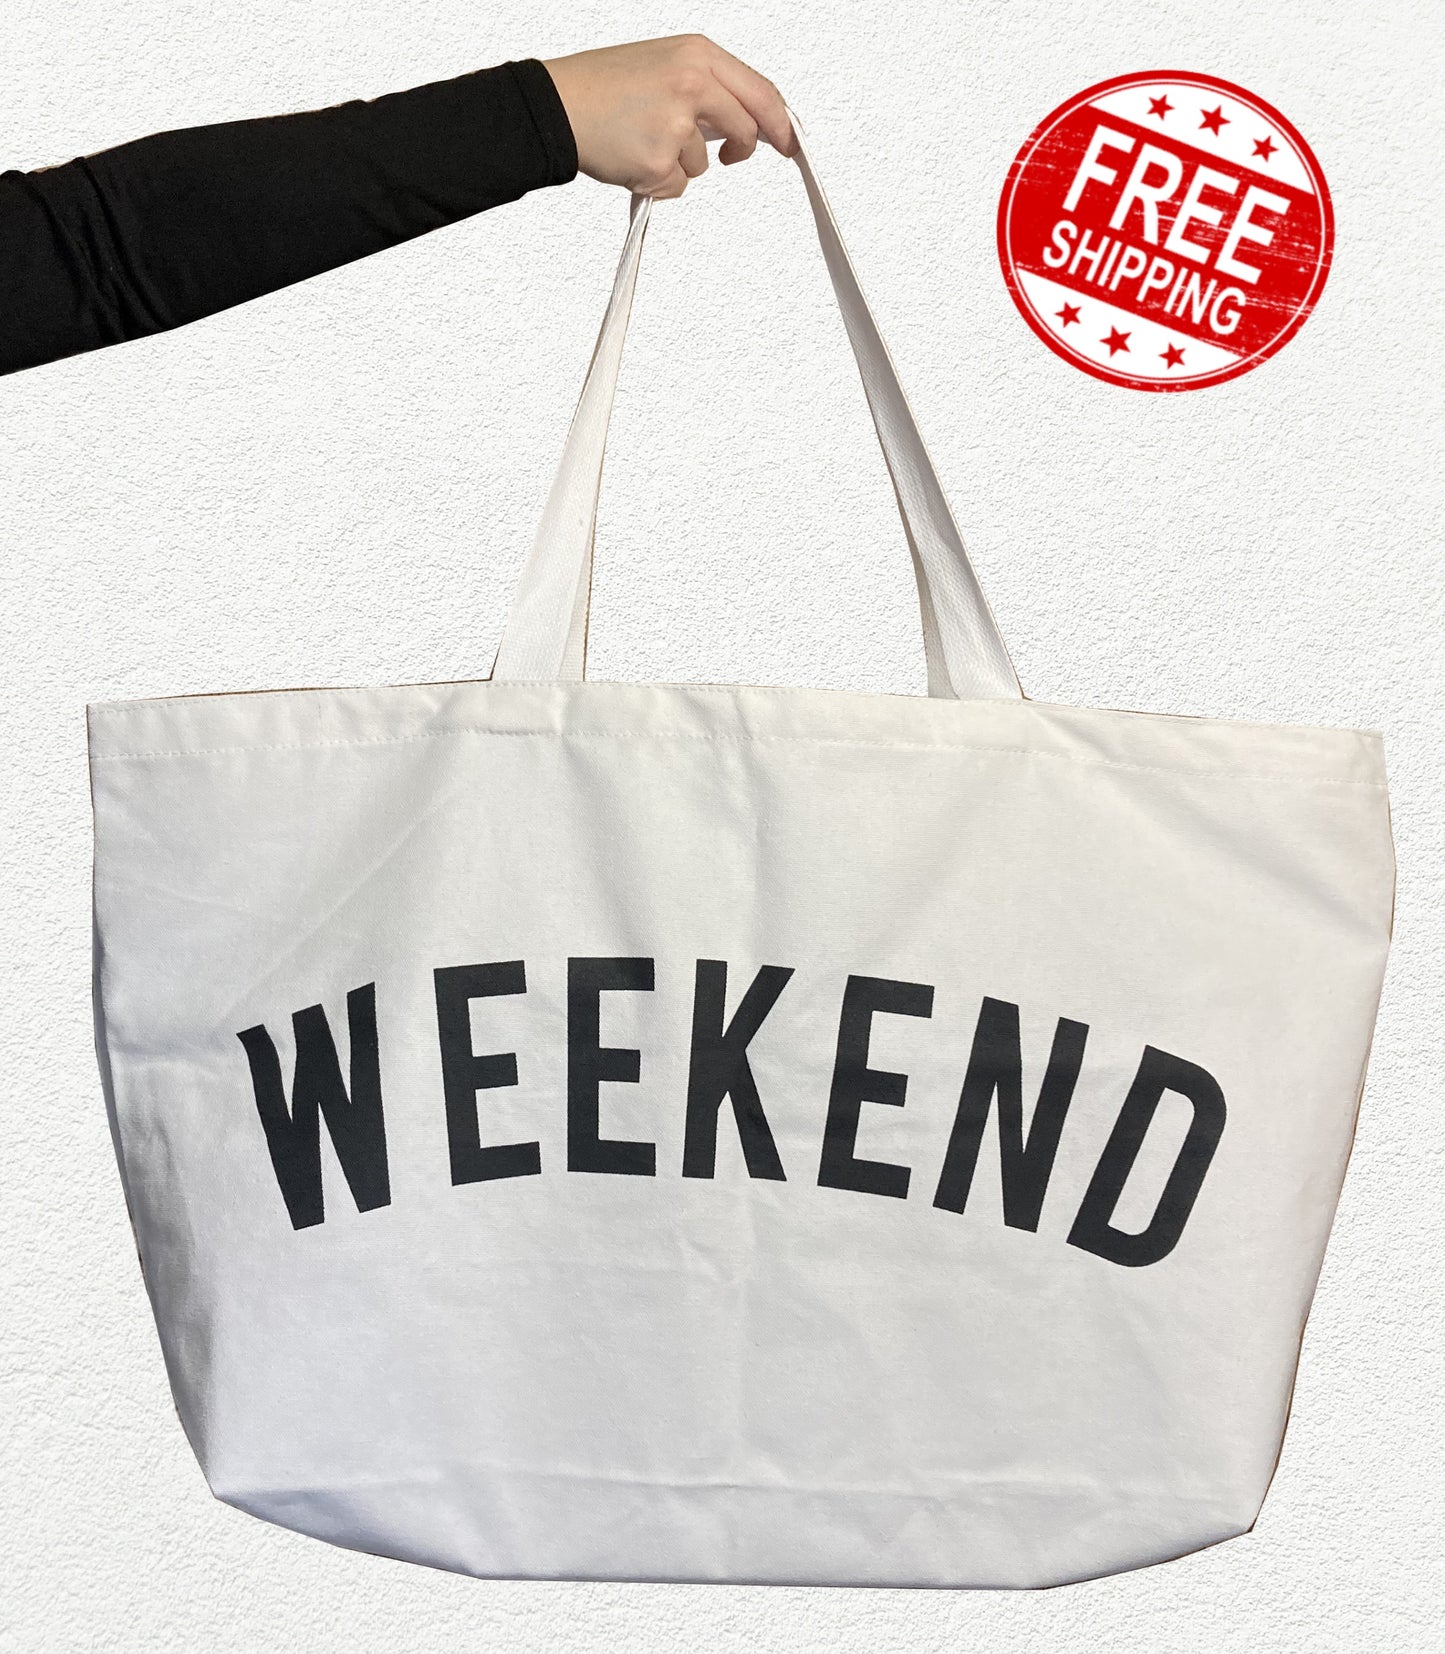 Extra Large Weekend Canvas Tote Bag - Plain Canvas (FREE SHIPPING)